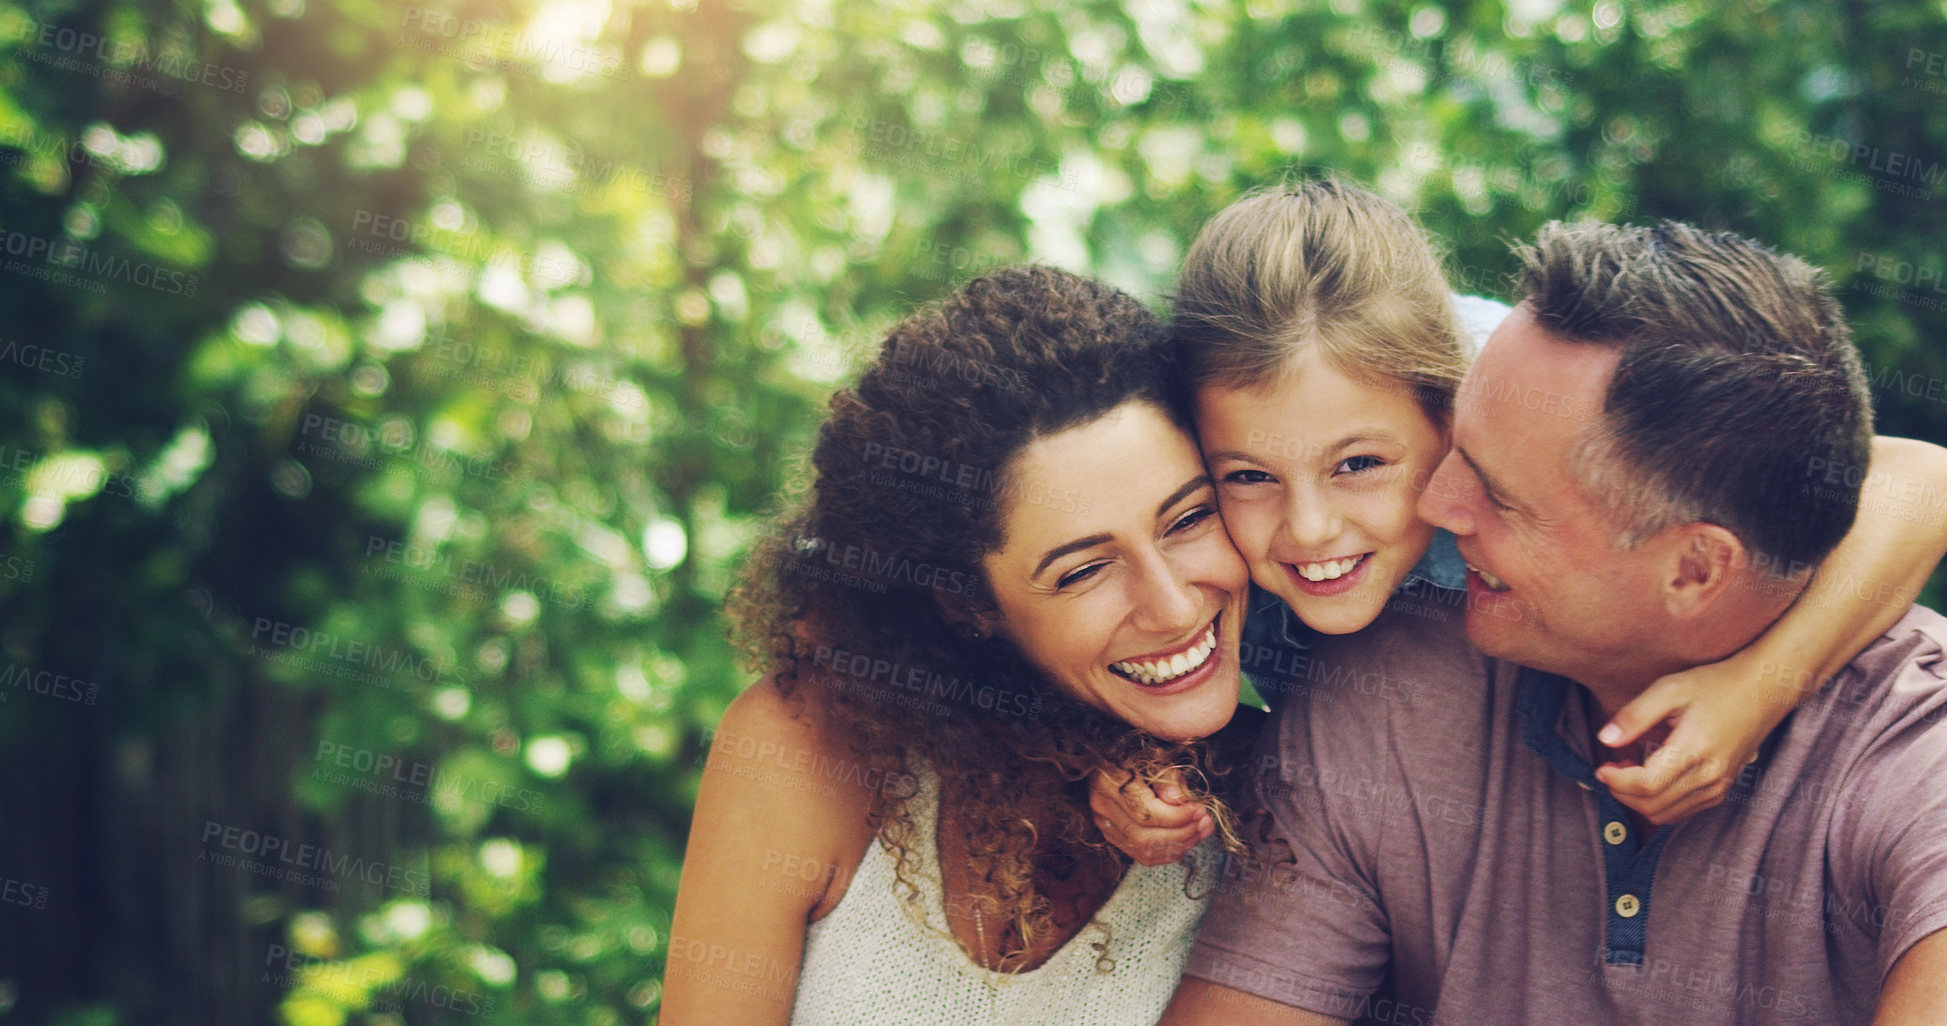 Buy stock photo Portrait of an affectionate little girl spending quality time with her mother and father outdoors